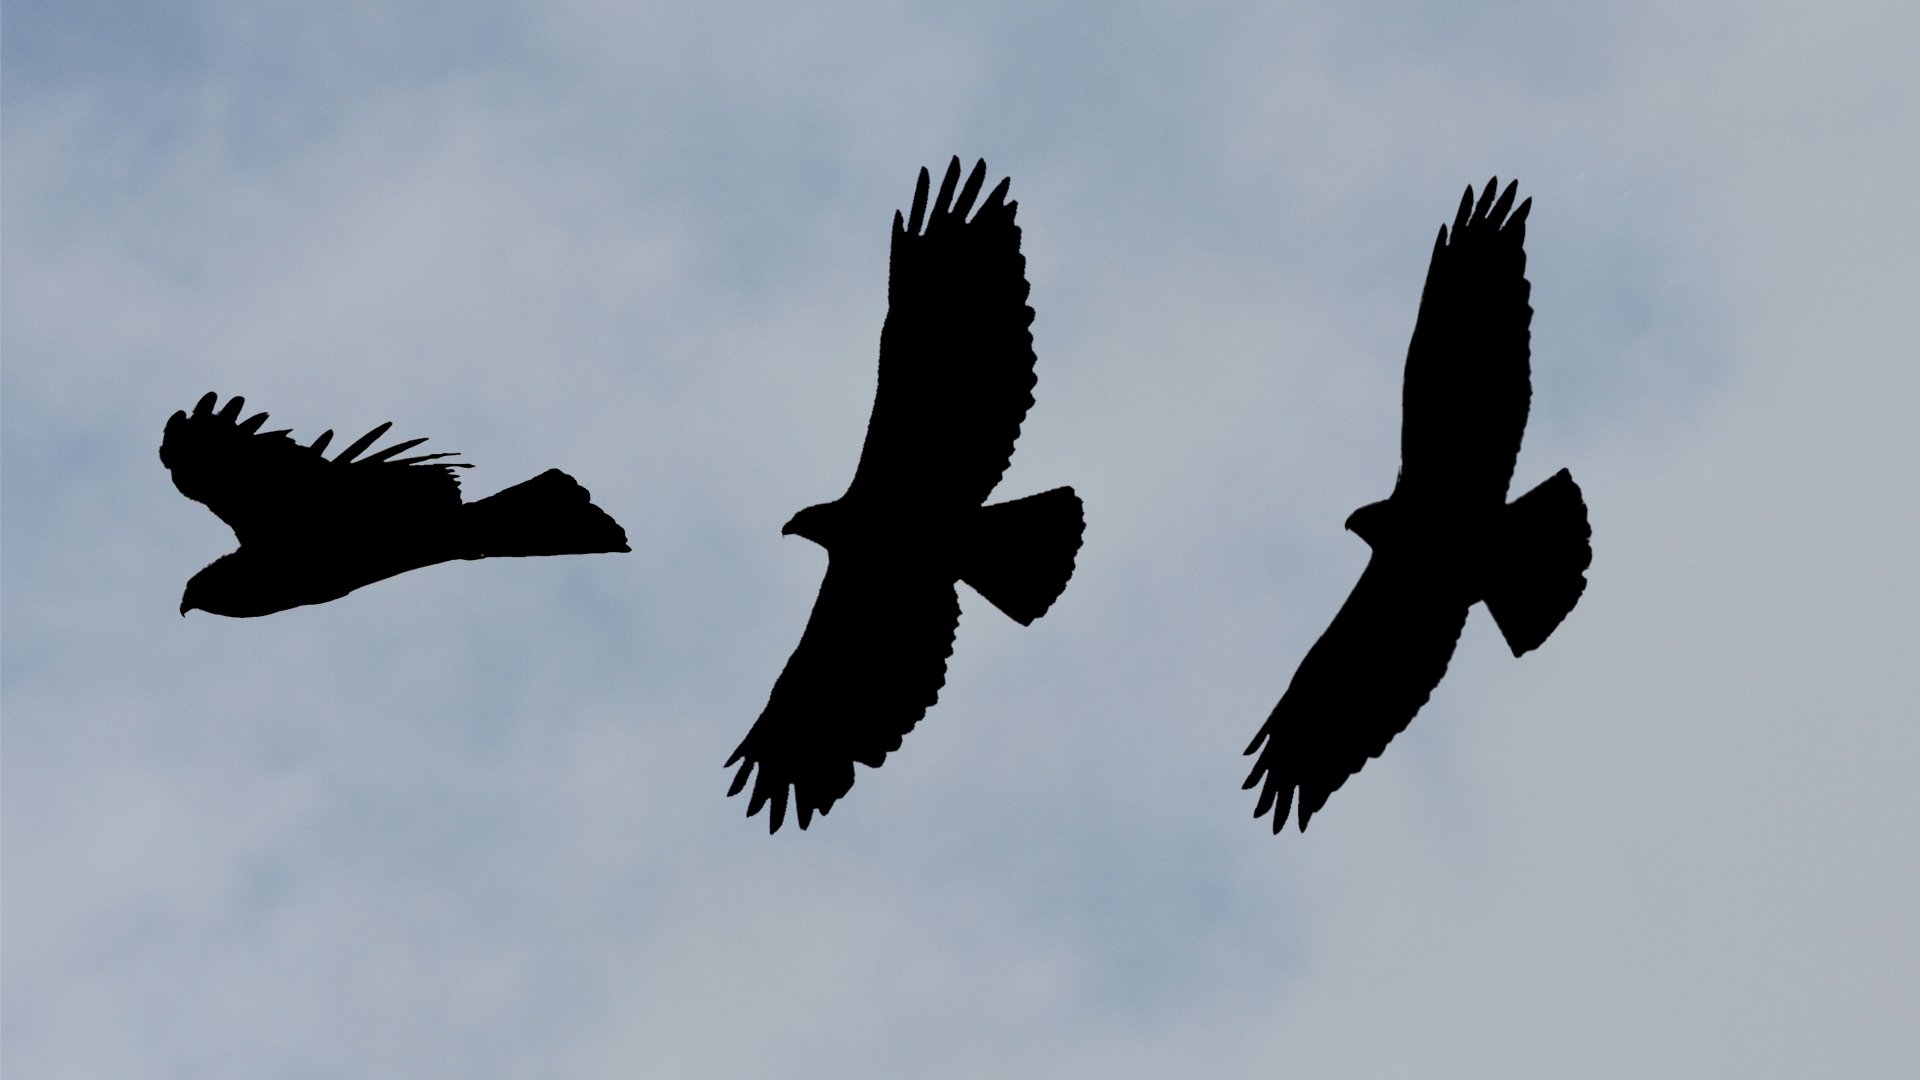 Left to right: Northern Harrier, Red-Tailed Hawk, Rough-Legged Hawk